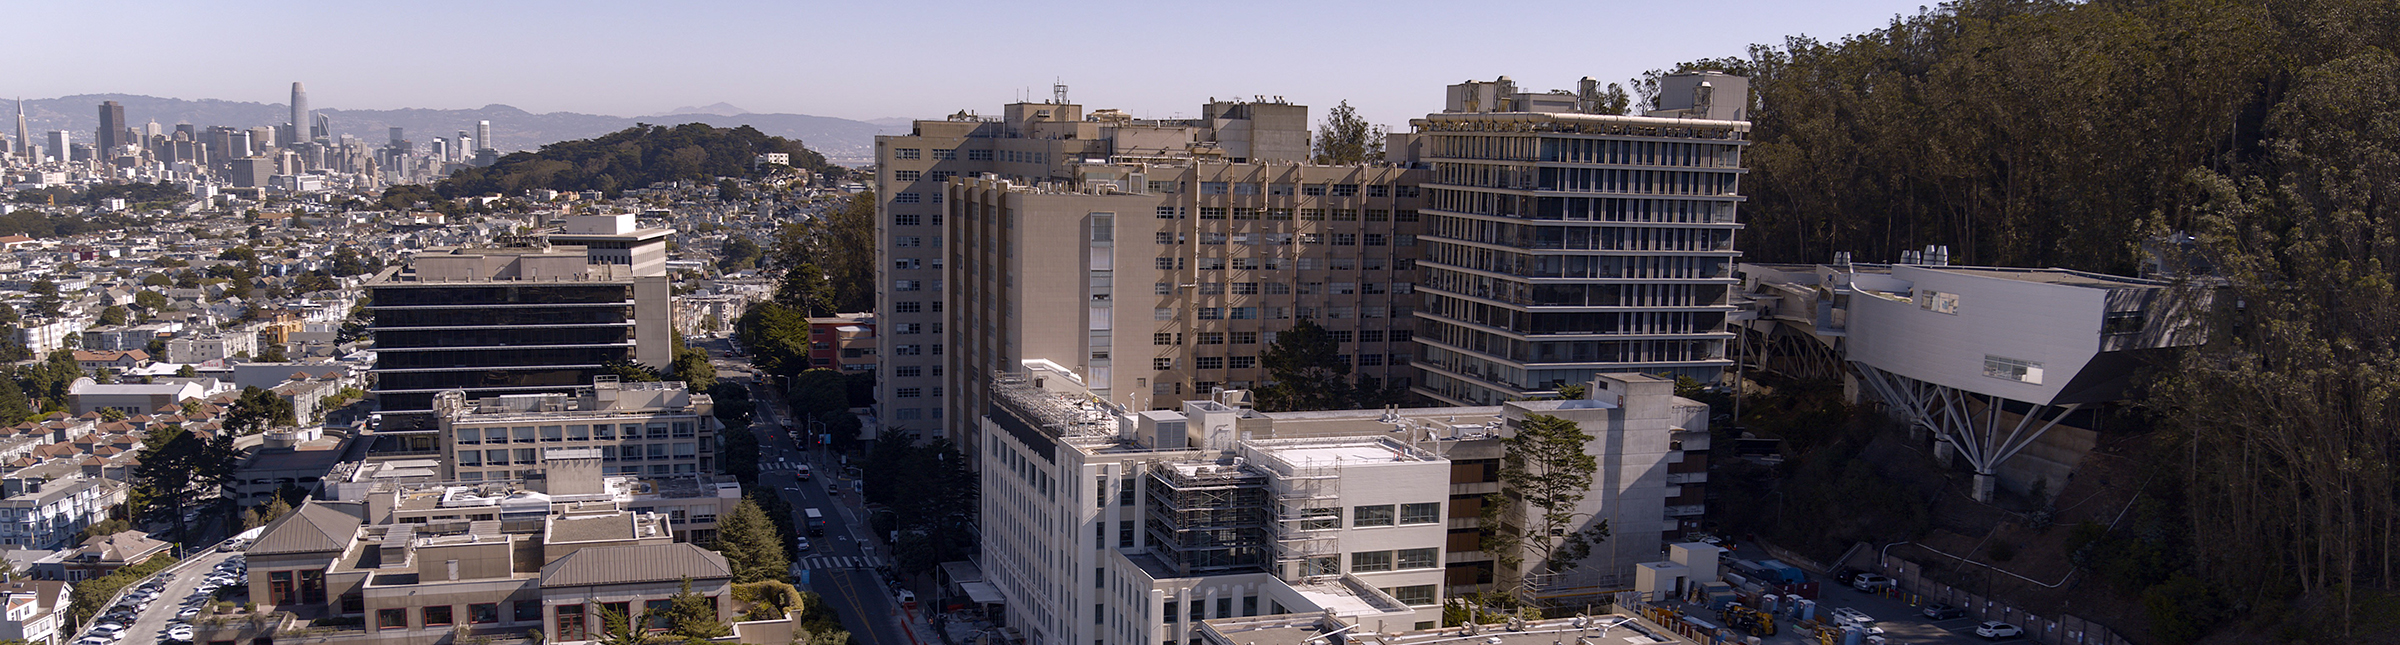 UCSF Parnassus Campus with the San Francisco skyline visible on the left